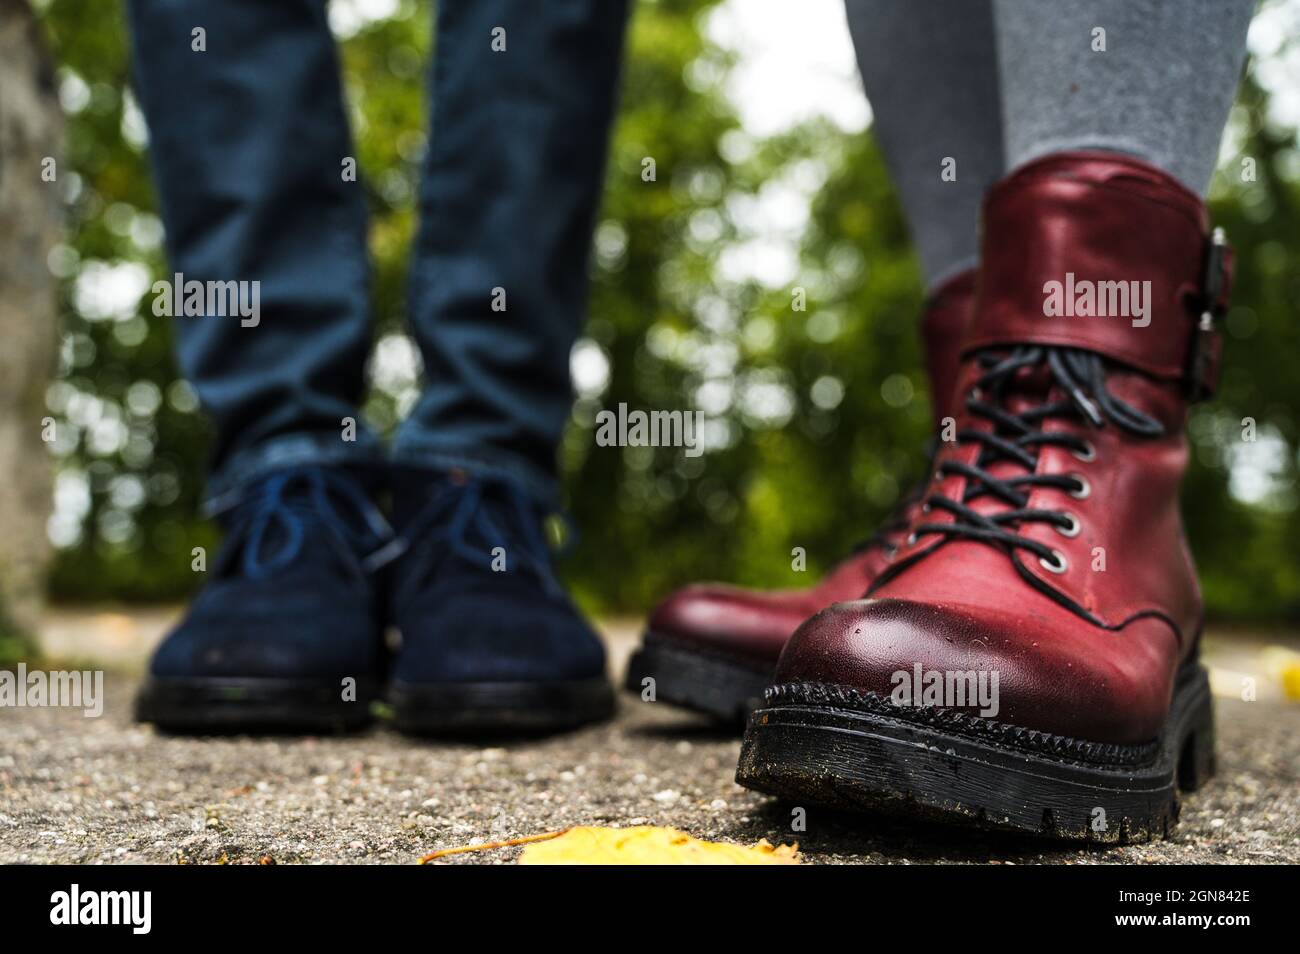 Burgundy leather boots. Blue suede shoes. Boy and girl. Asphalt with fallen leaves. Autumn fashion footwear. Stock Photo